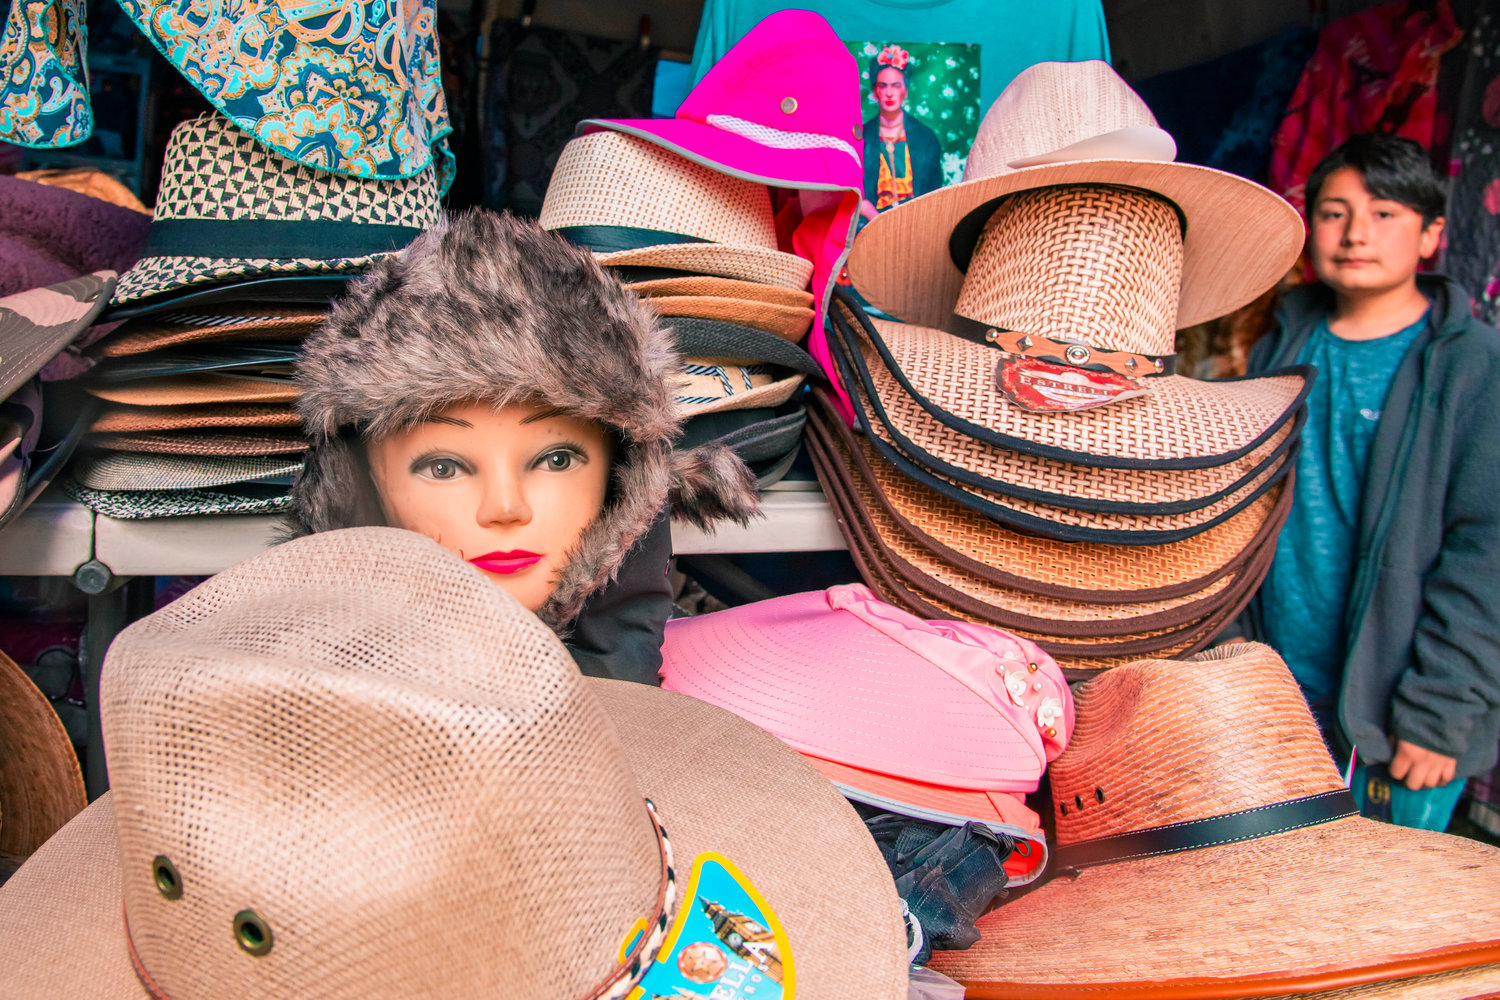 Hats are displayed for sale at the Packwood Flea Market on Friday.